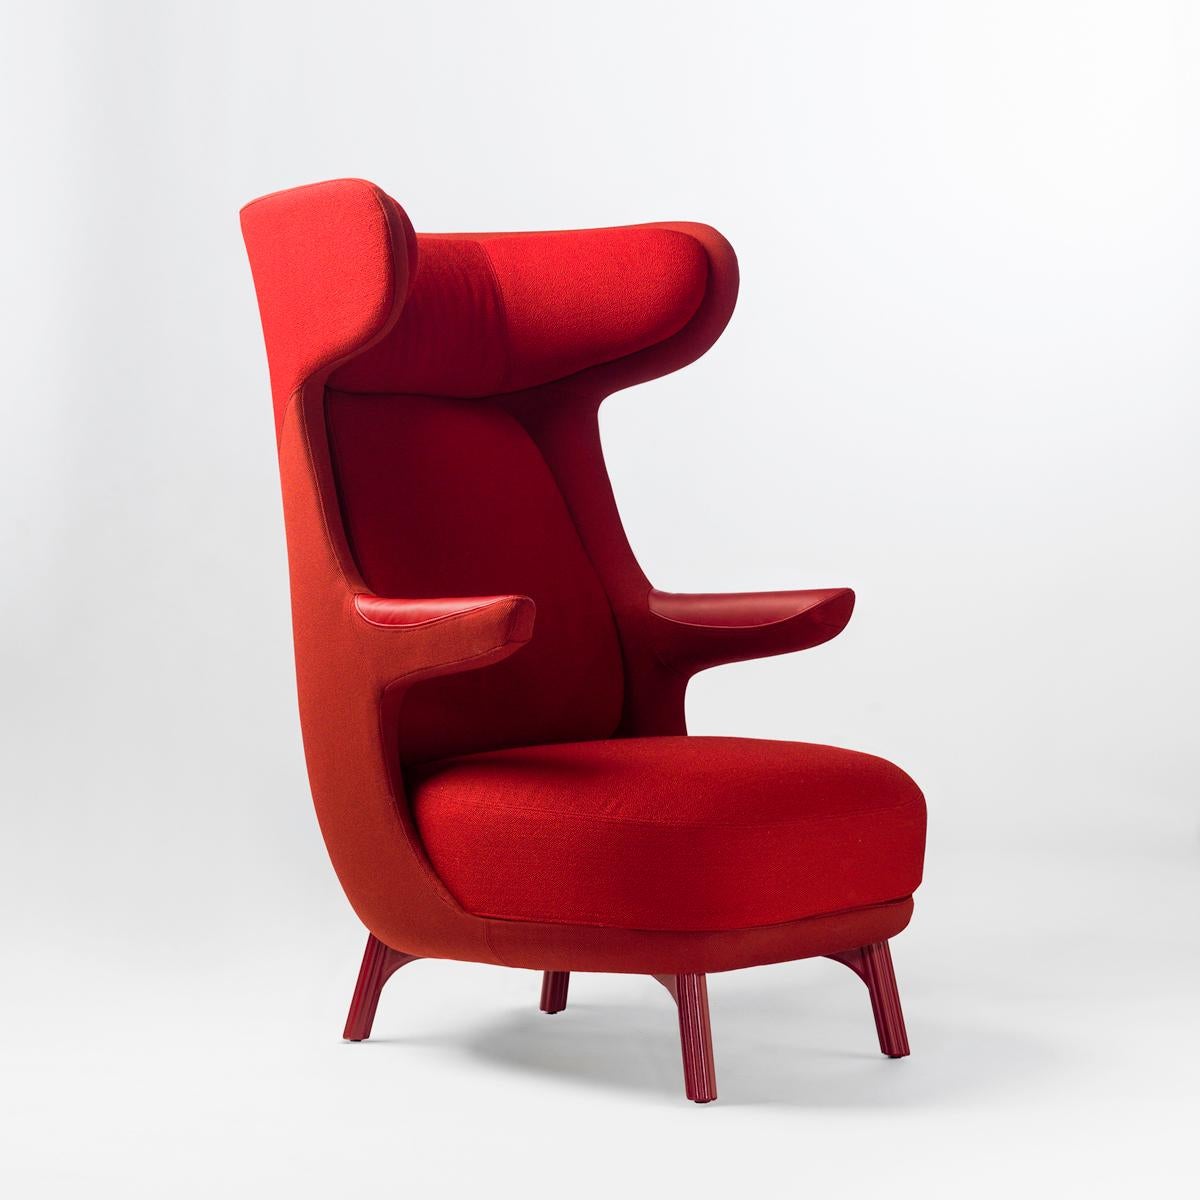 Spanish Jaime Hayon, Contemporary Monocolor Red Fabric Leather Upholstery Dino Armchair